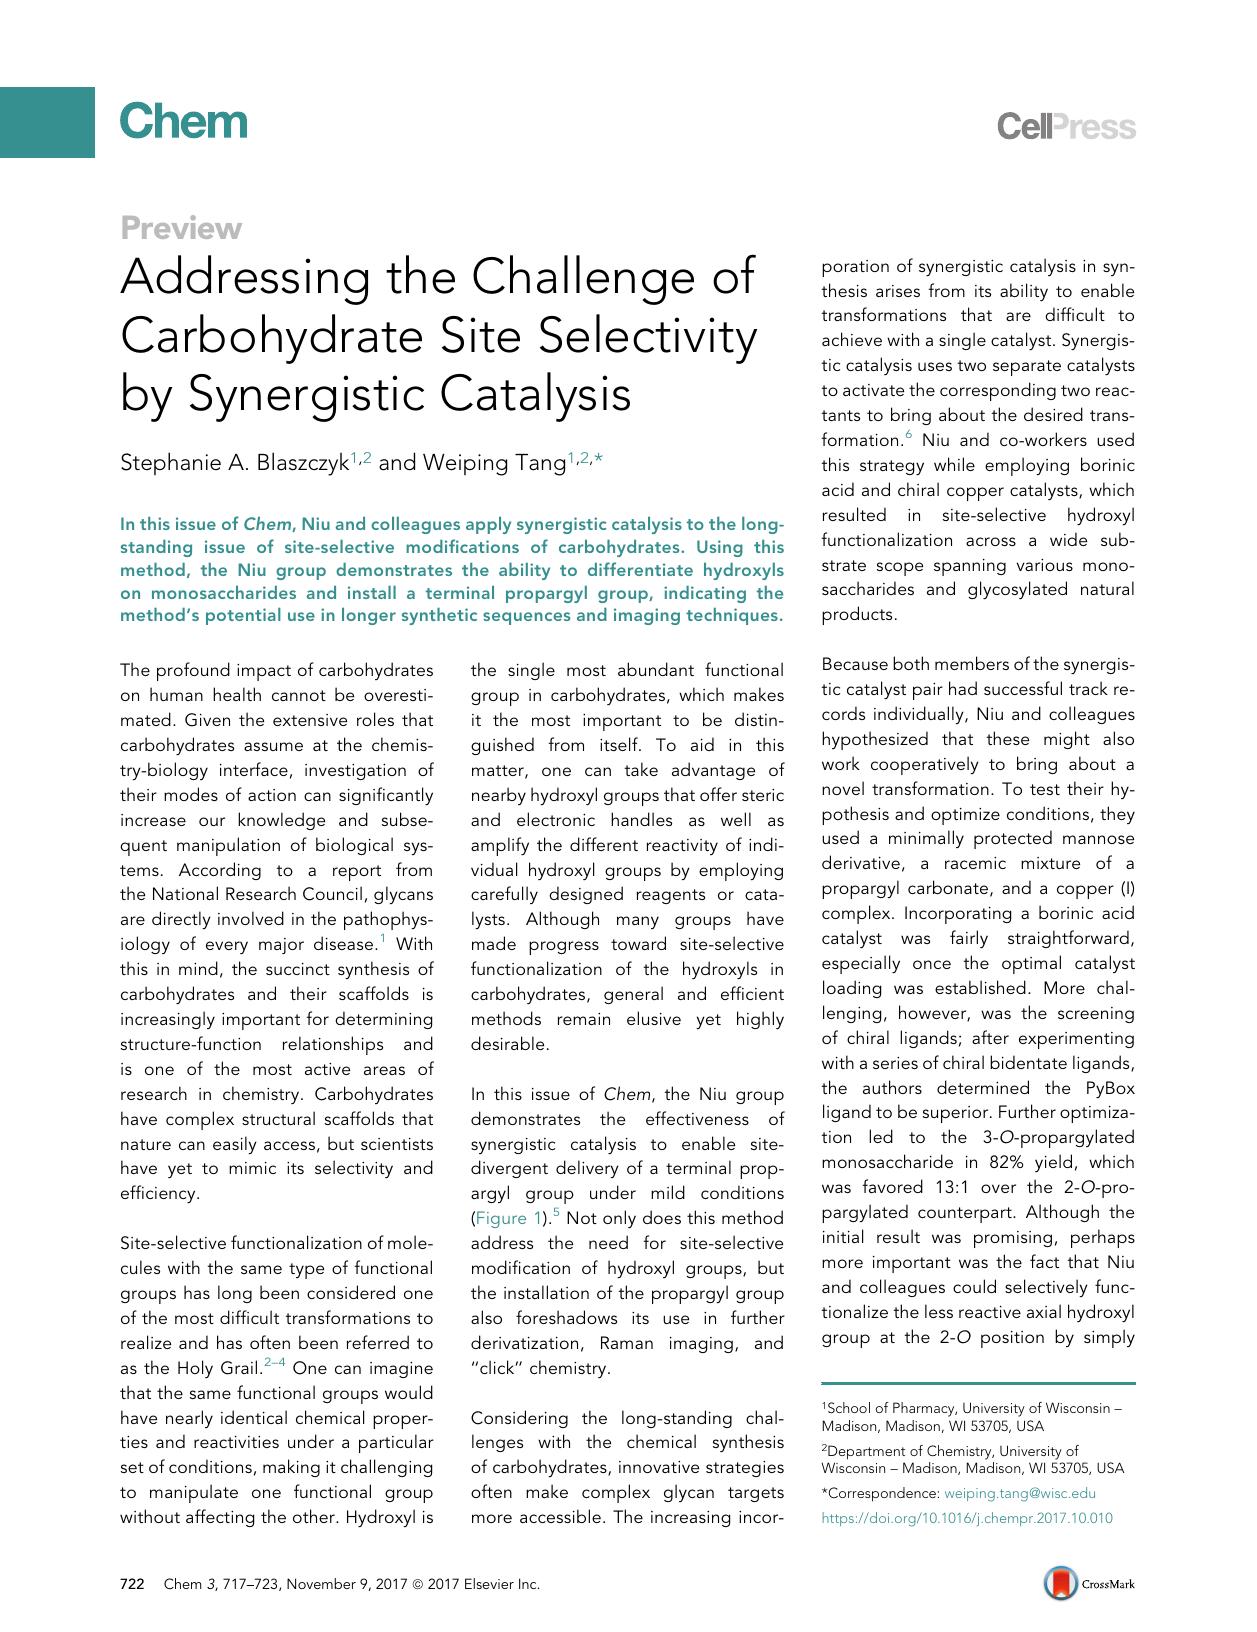 Addressing the Challenge of Carbohydrate Site Selectivity by Synergistic Catalysis by Stephanie A. Blaszczyk & Weiping Tang